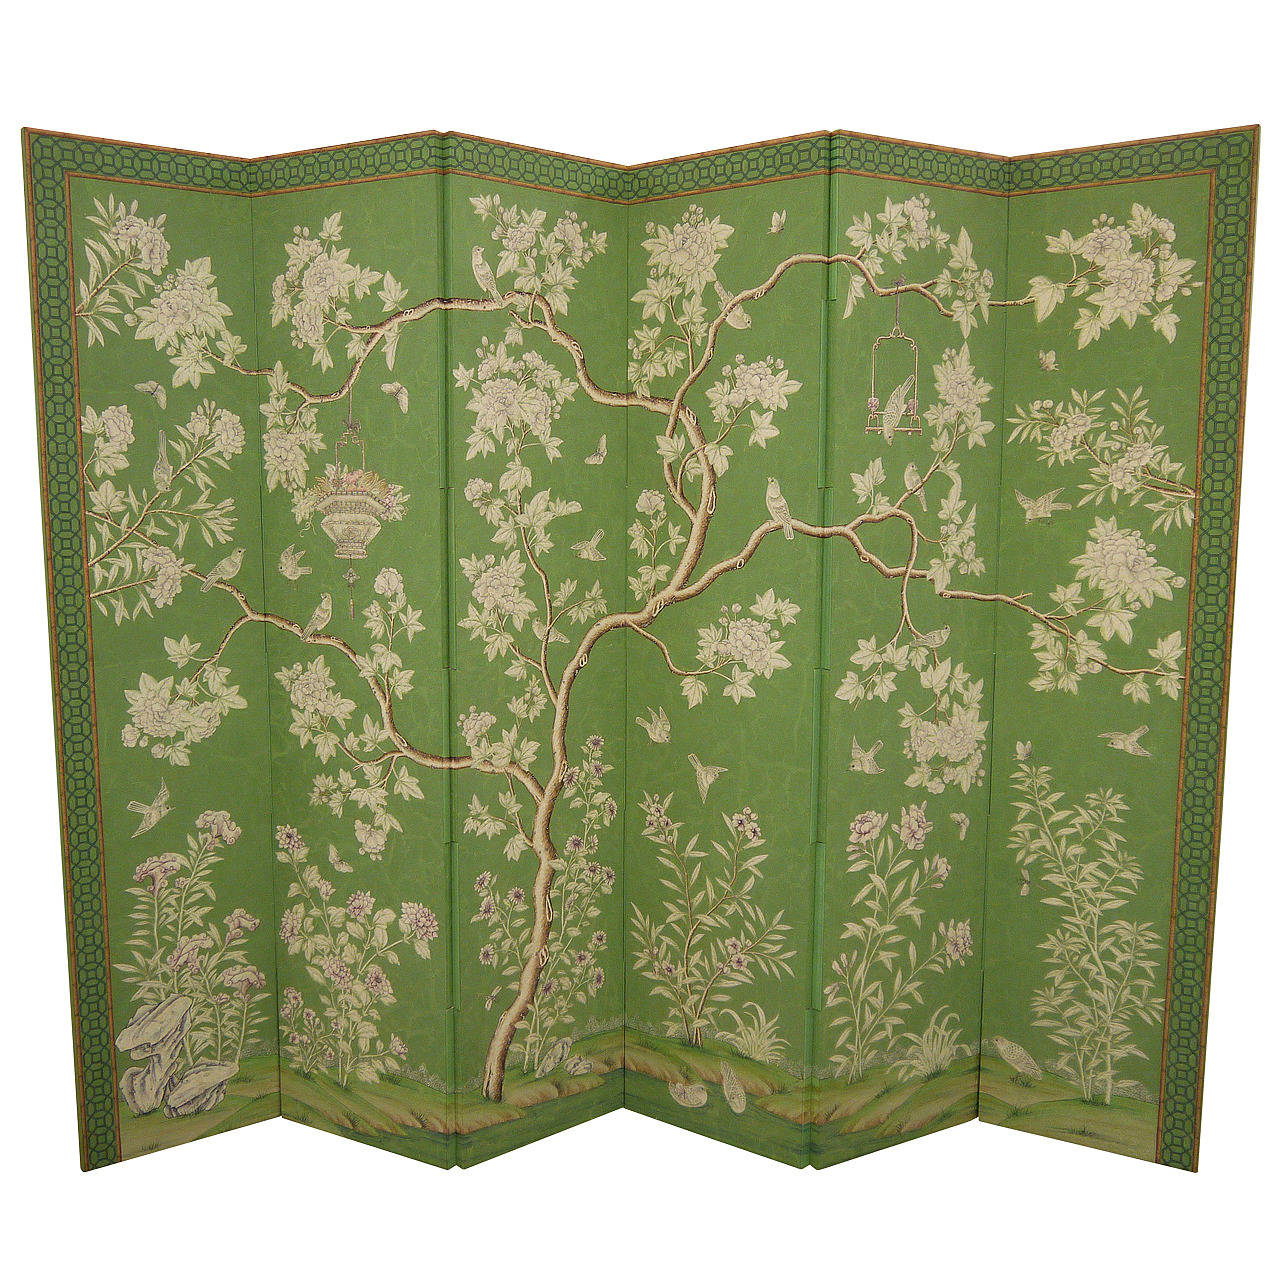 Gracie Handpainted Chinese Wallpaper Screen at 1stdibs